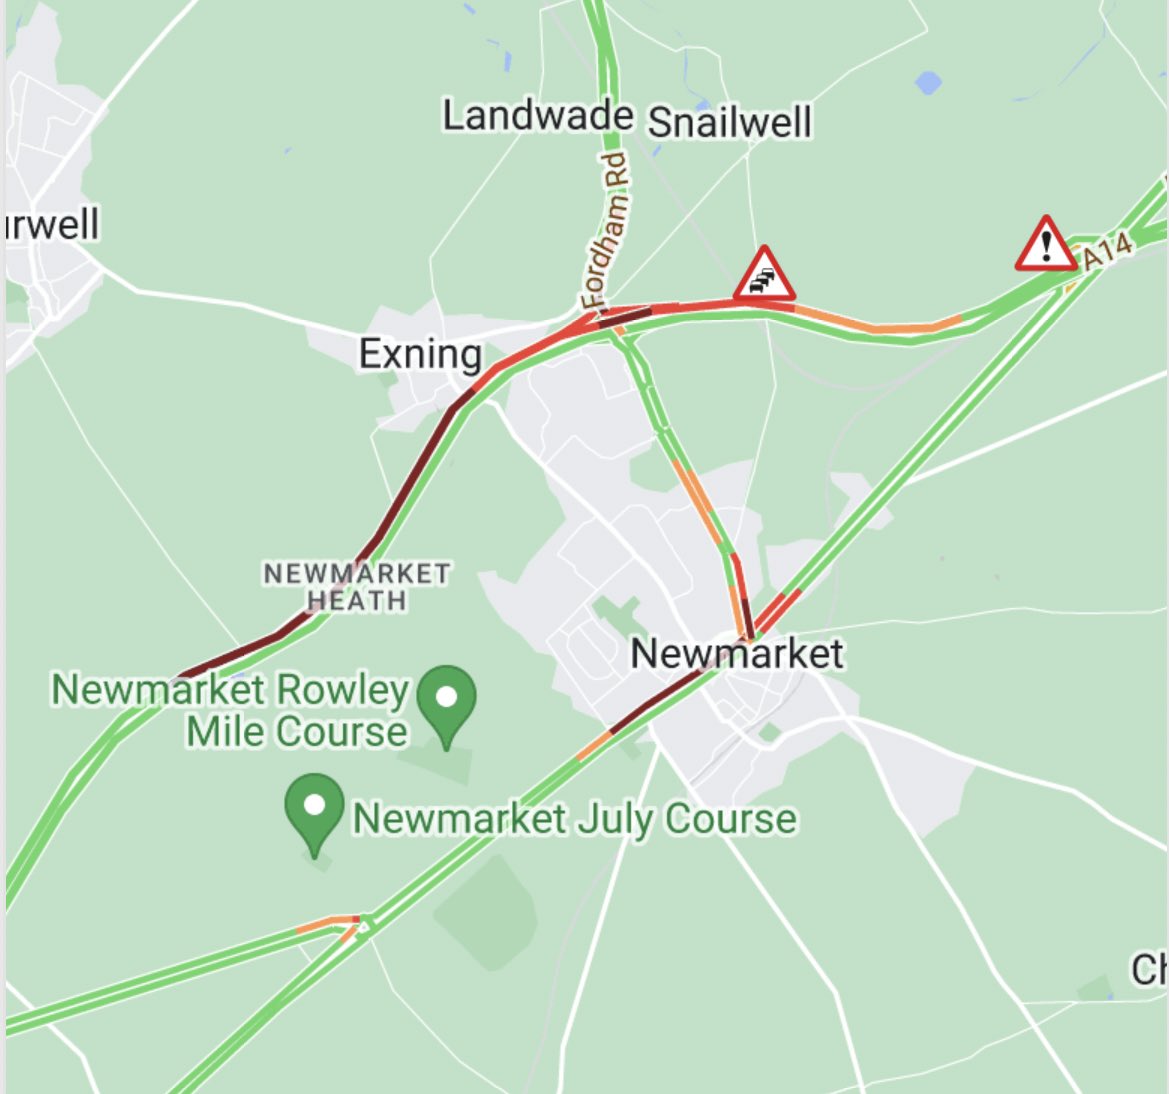 #A14 eastbound - two lanes closed and queueing traffic - between J37 (Newmarket/A142) and J38 (A11) - due to emergency drainage repairs - following extensive flooding - queues back passed BP Newmarket Services - 25 minute delays towards Bury St Edmunds